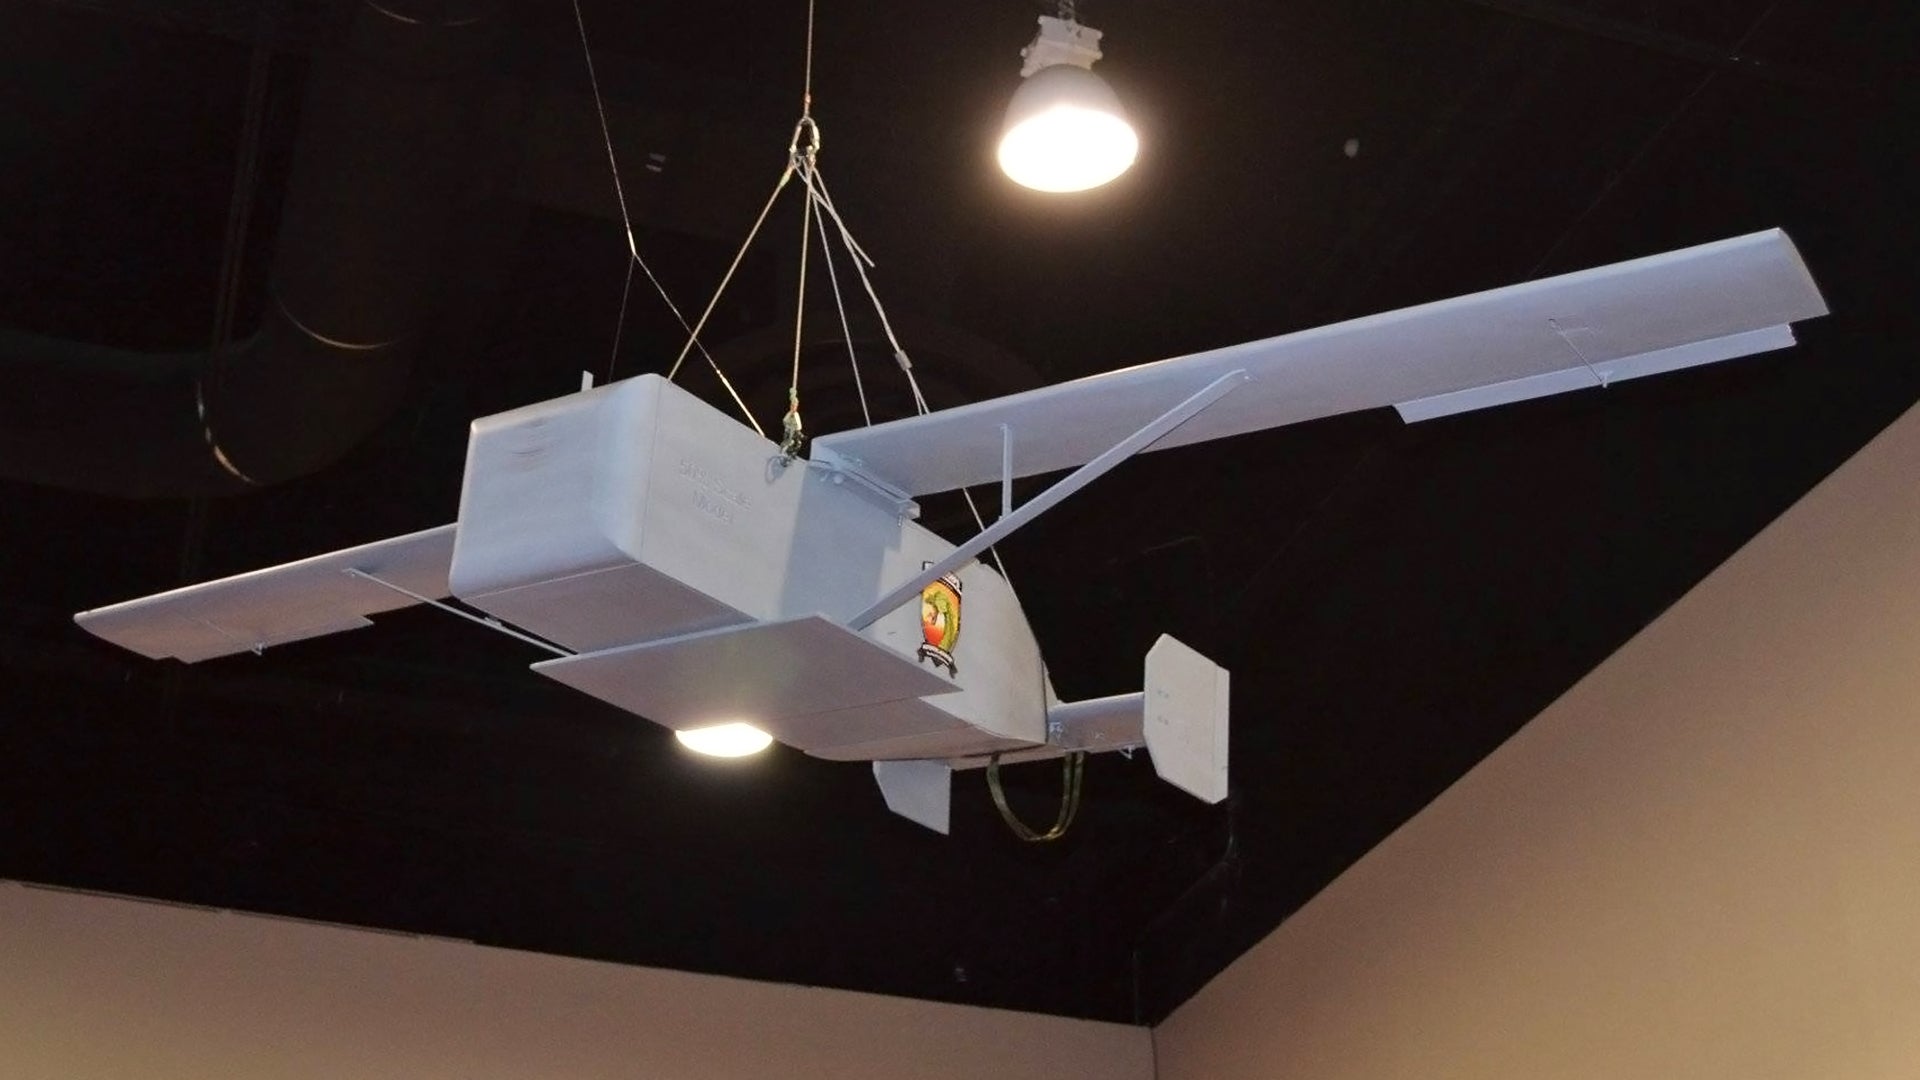 This Throw-Away Drone Could Rush Supplies to Marines in Need